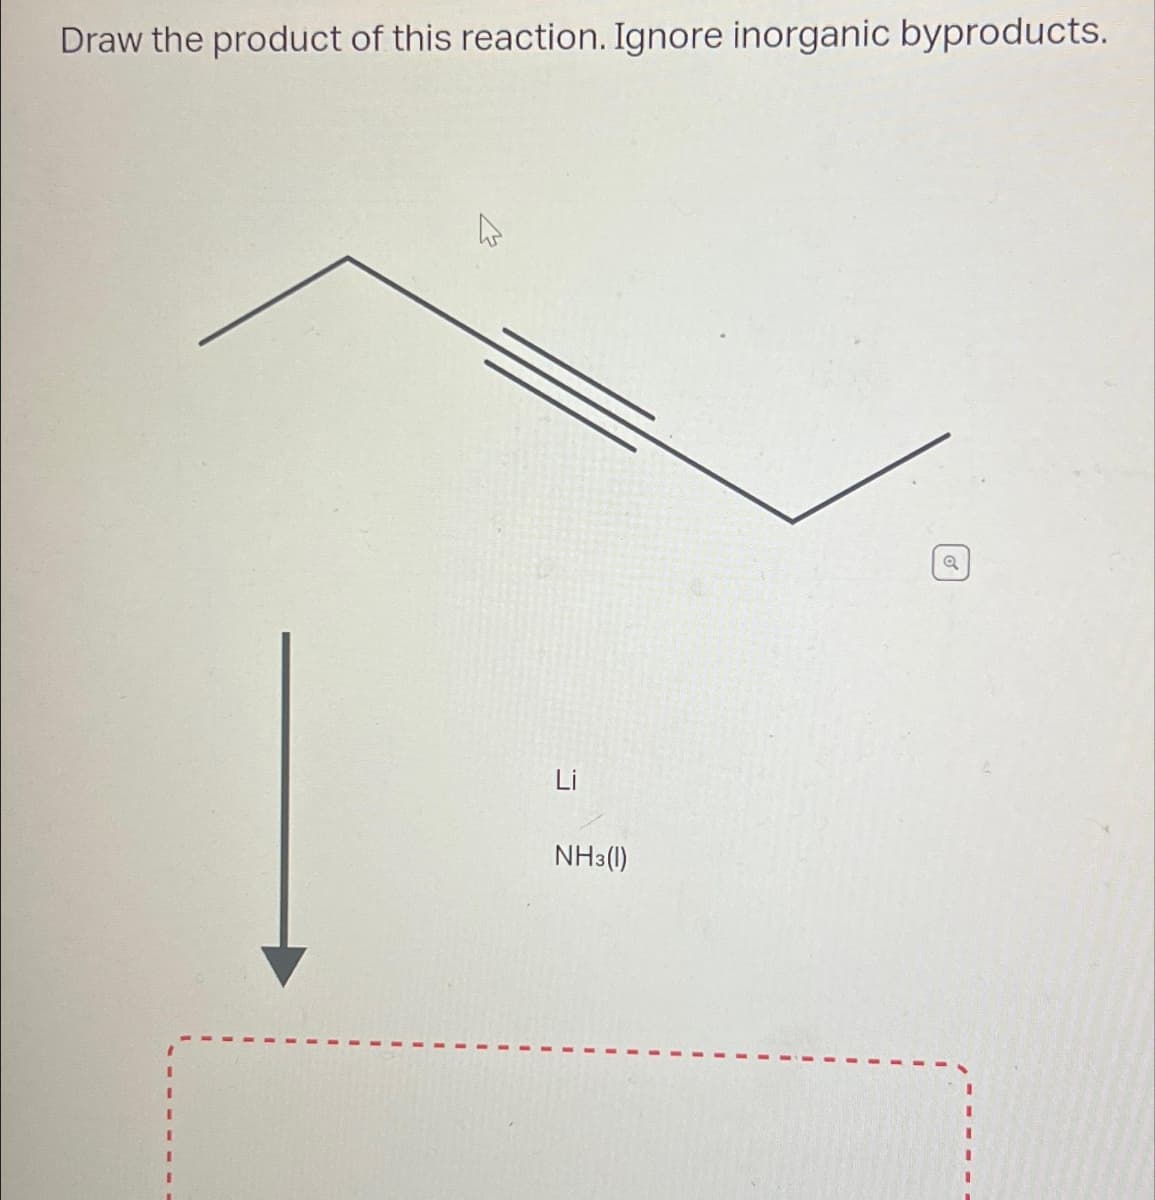 Draw the product of this reaction. Ignore inorganic byproducts.
NH3(1)